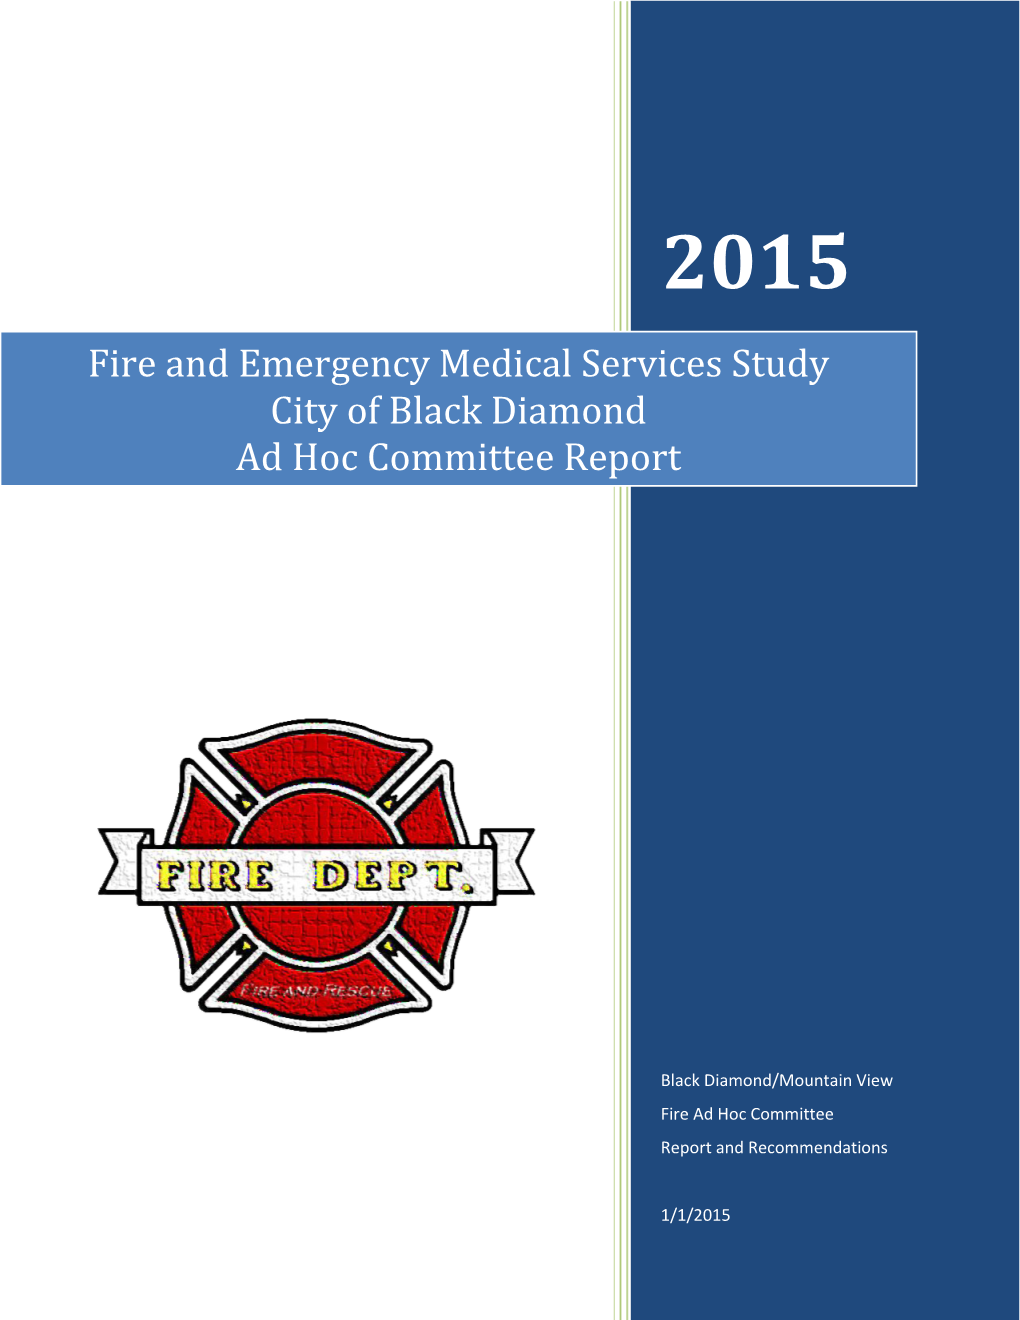 Fire and Emergency Medical Services Study City of Black Diamond Ad Hoc Committee Report